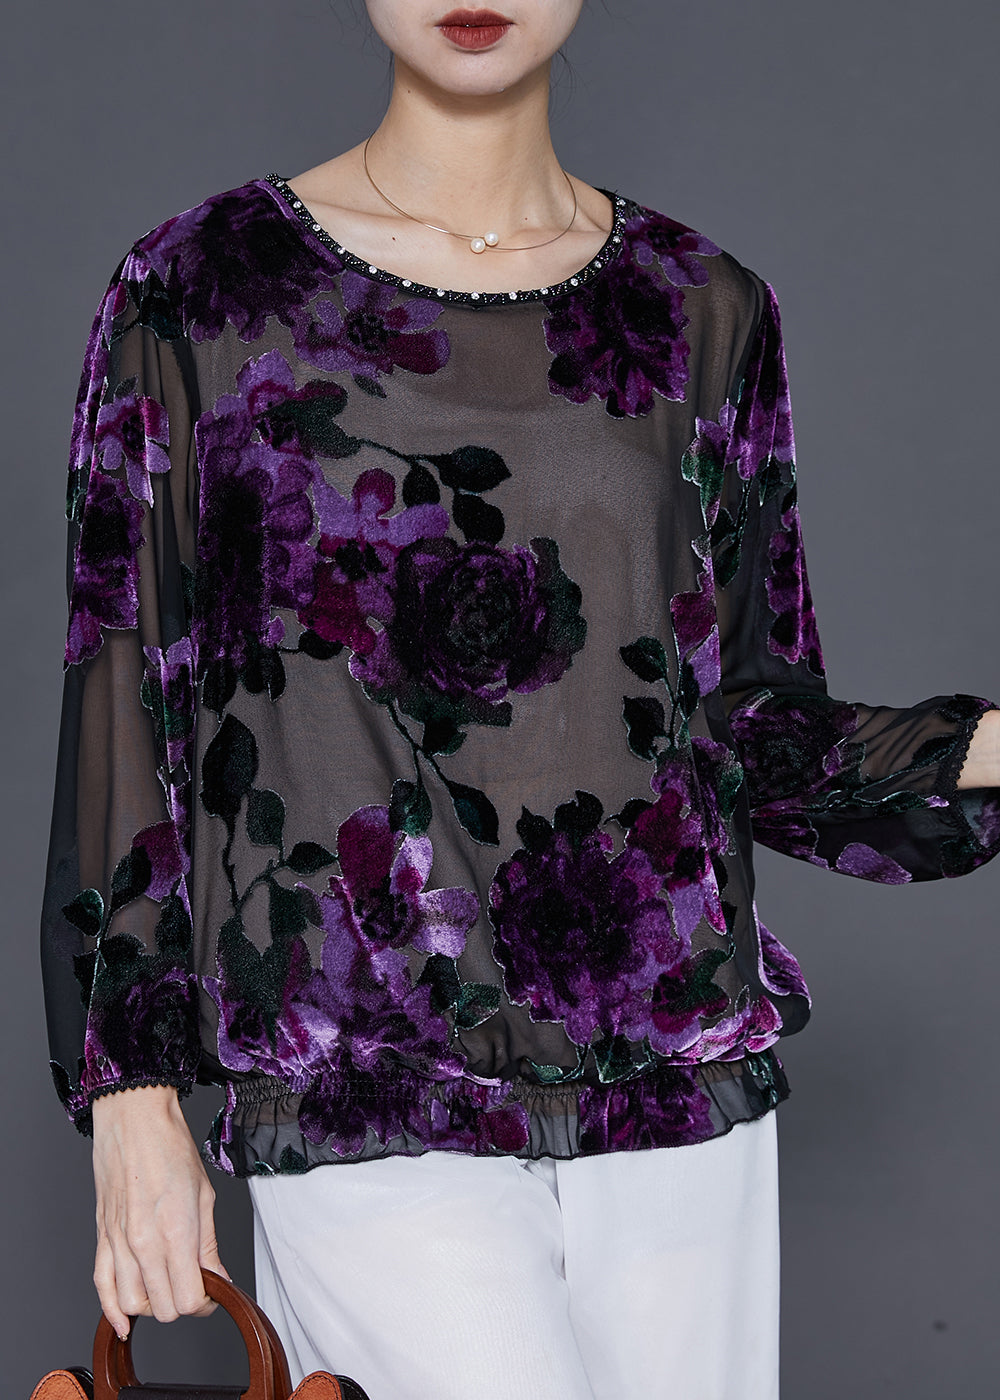 Style Purple Jacquard Hollow Out Tulle Top Spring